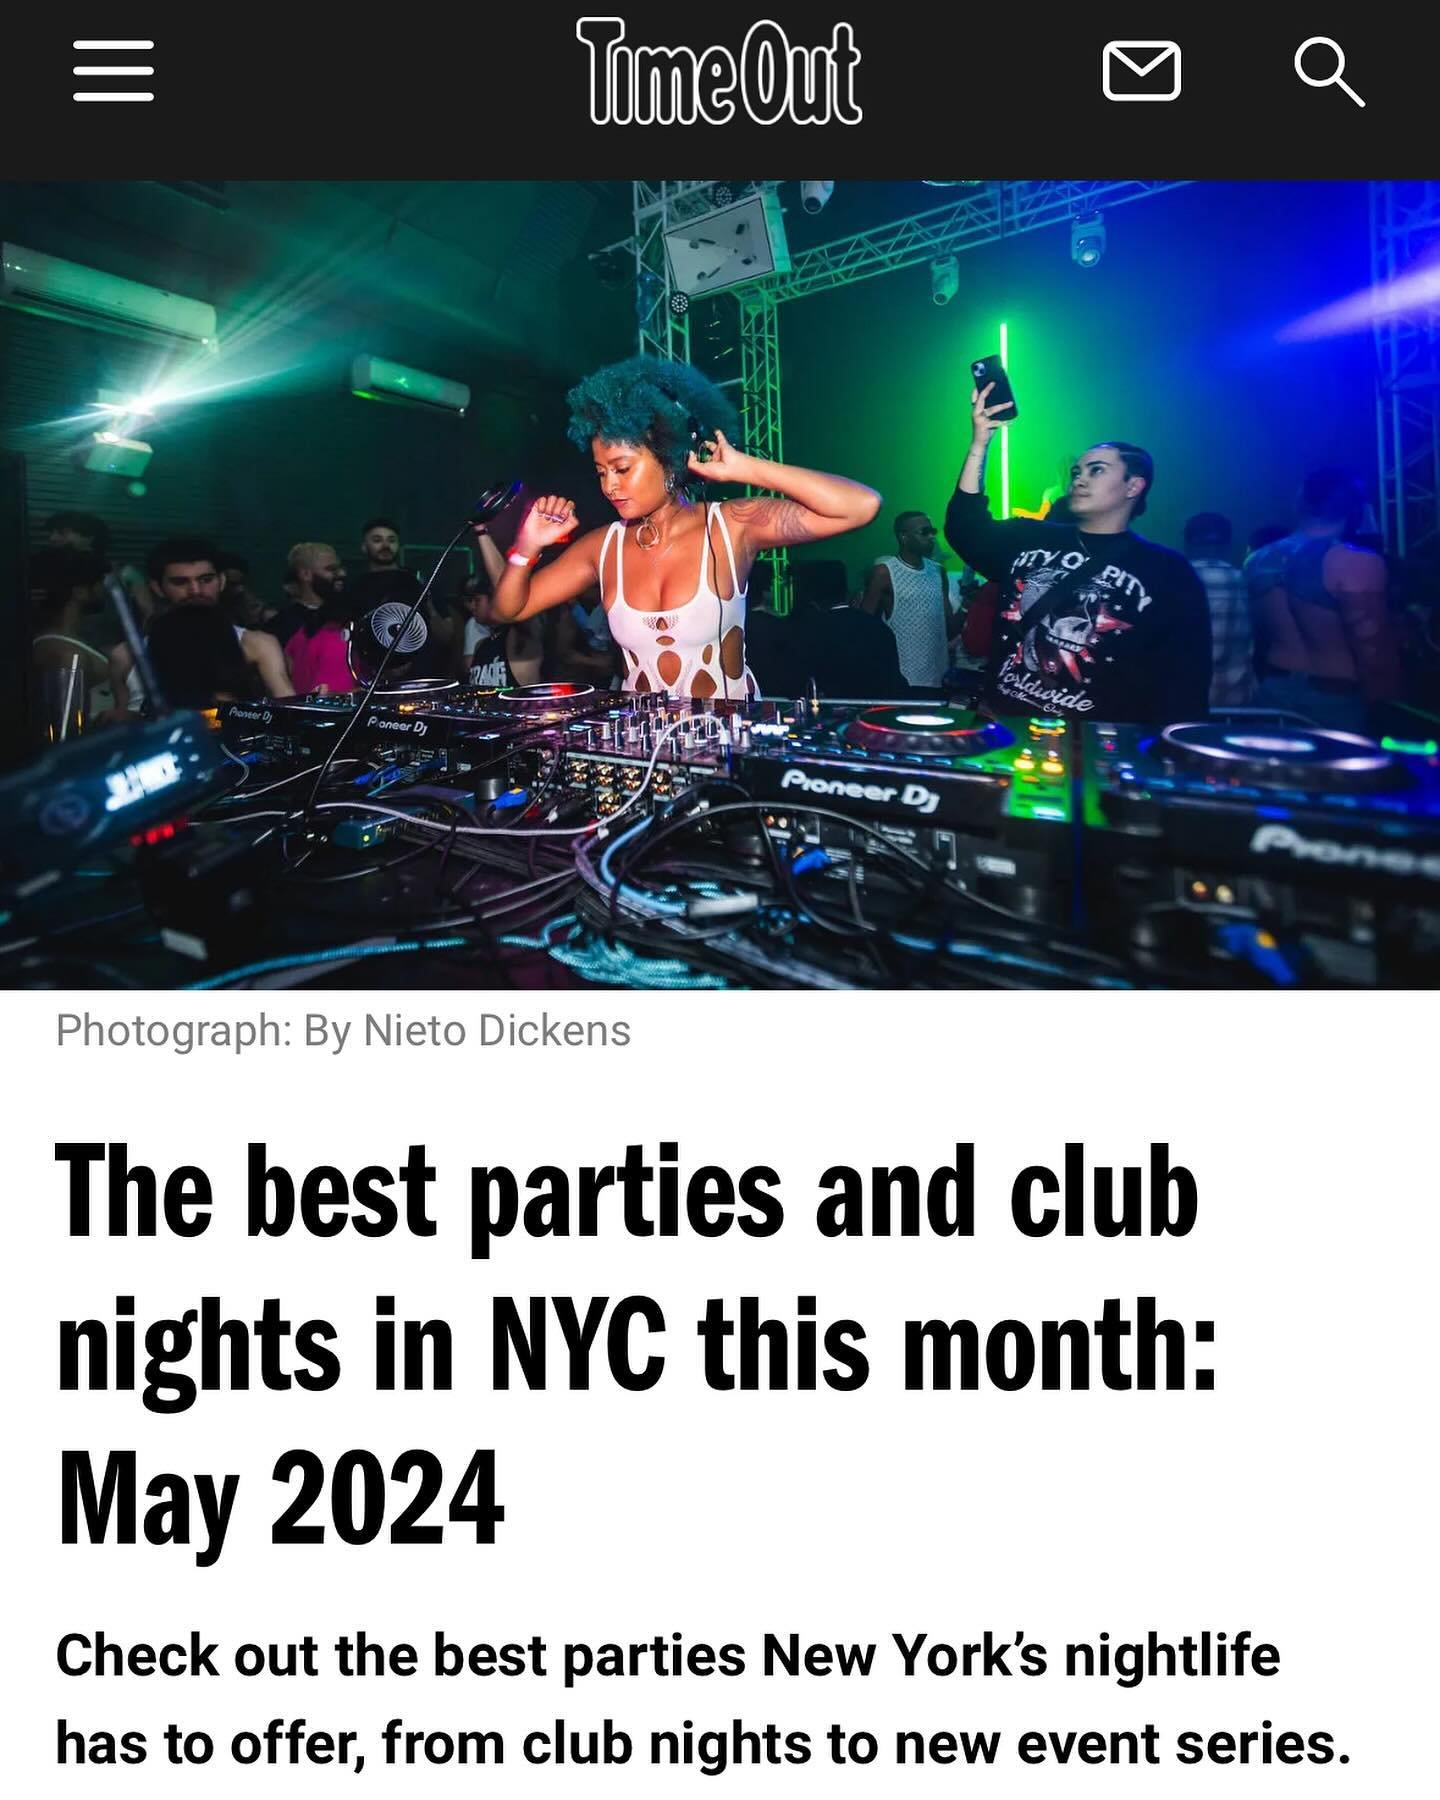 Thanks @oyystersauce &amp; @timeoutnewyork for the shout out! Catch us back at @hushhkbar on Friday May 10 ⛓️😈